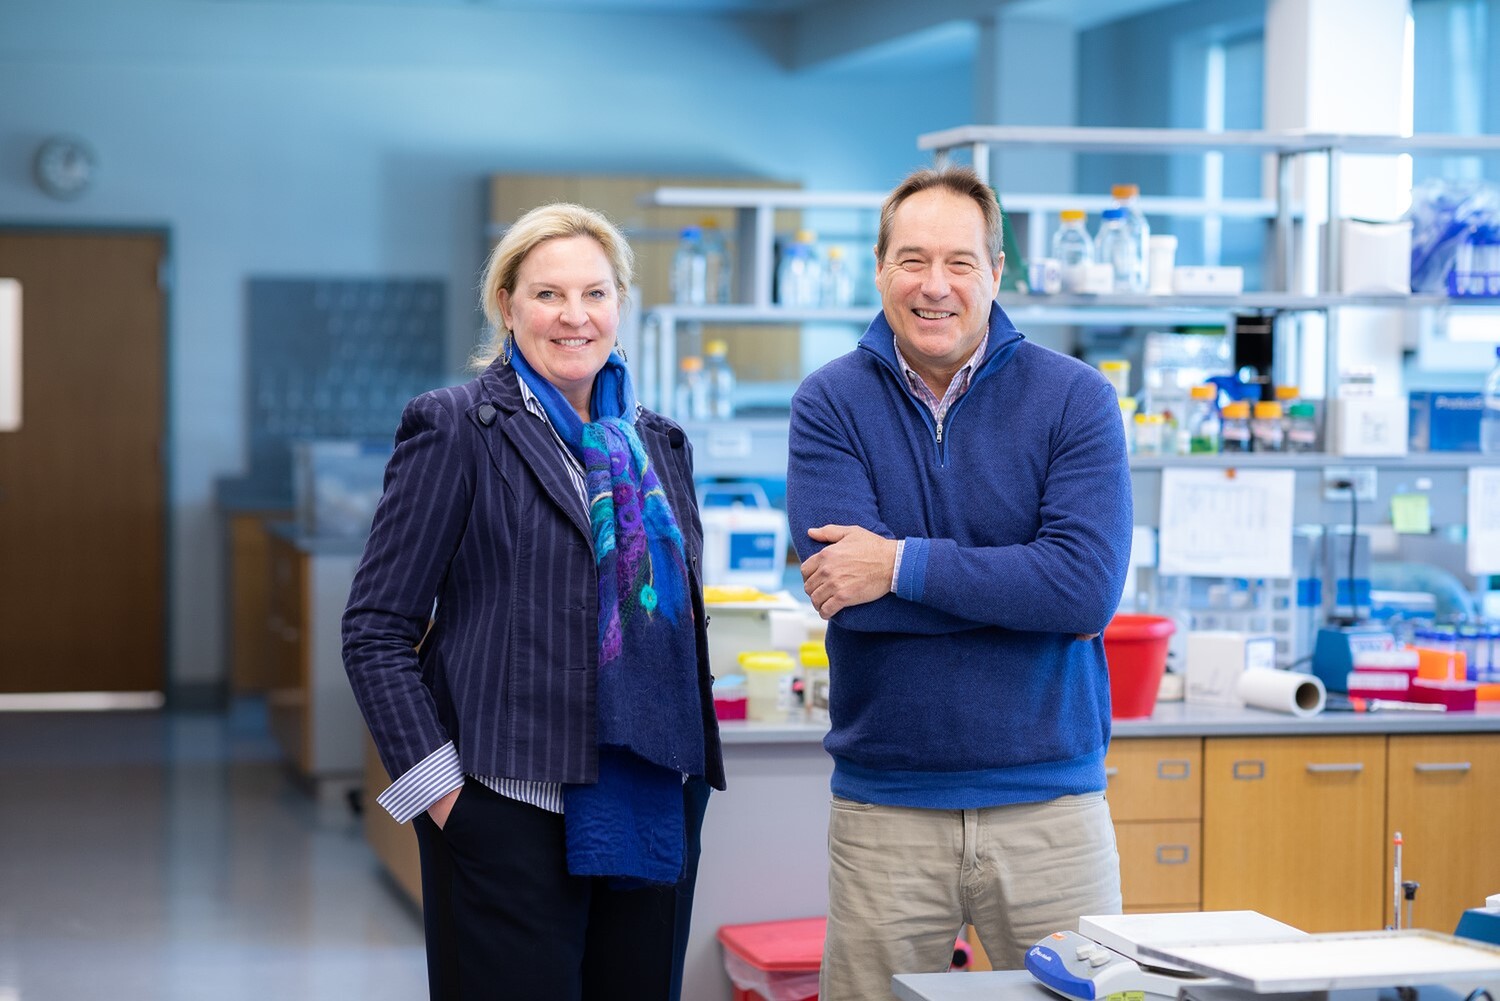 Laura Niedernhofer, M.D., Ph.D., and Paul Robbins, Ph.D., stand in their research lab